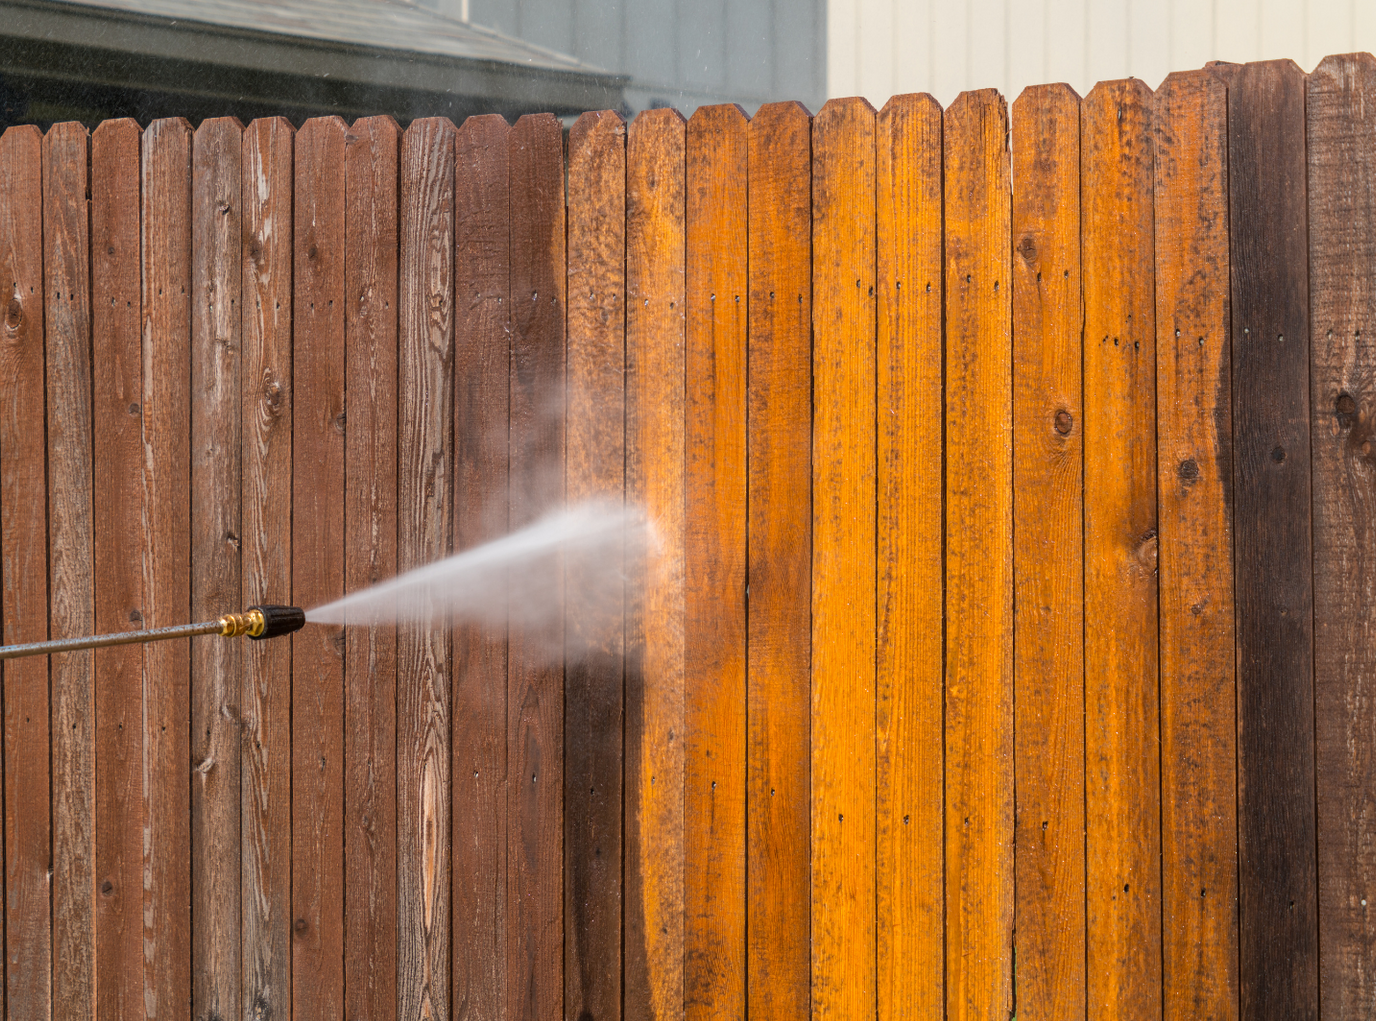 Pressure cleaning a dirty wood fence in Houston, Texas